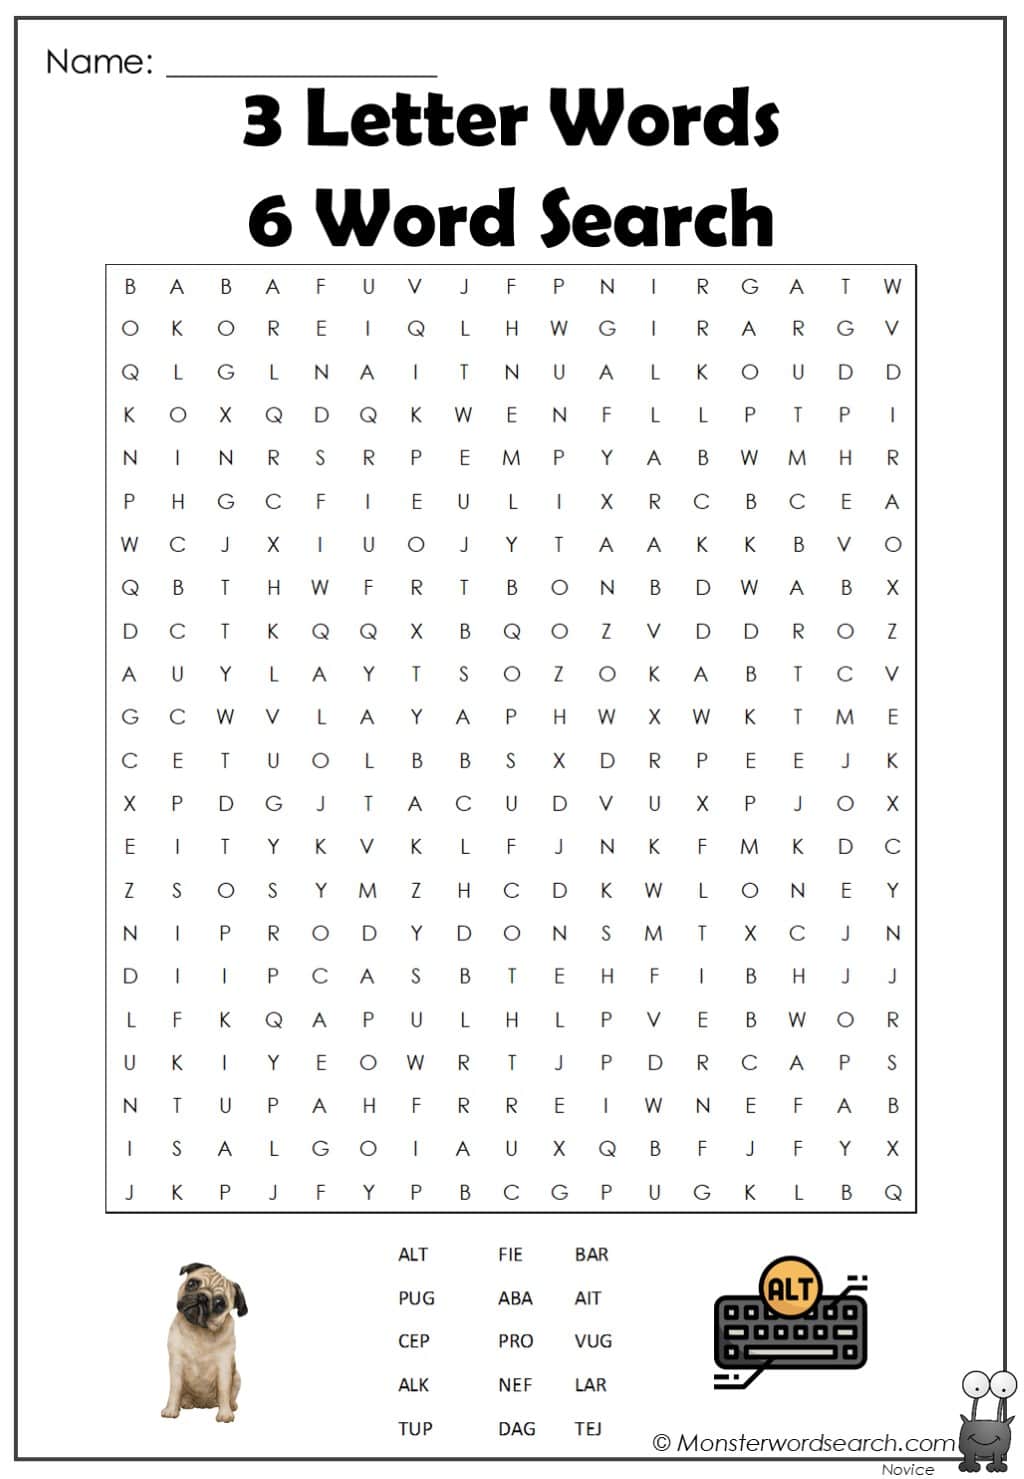 3 Letter Words 6 Word Search- Monster Word Search